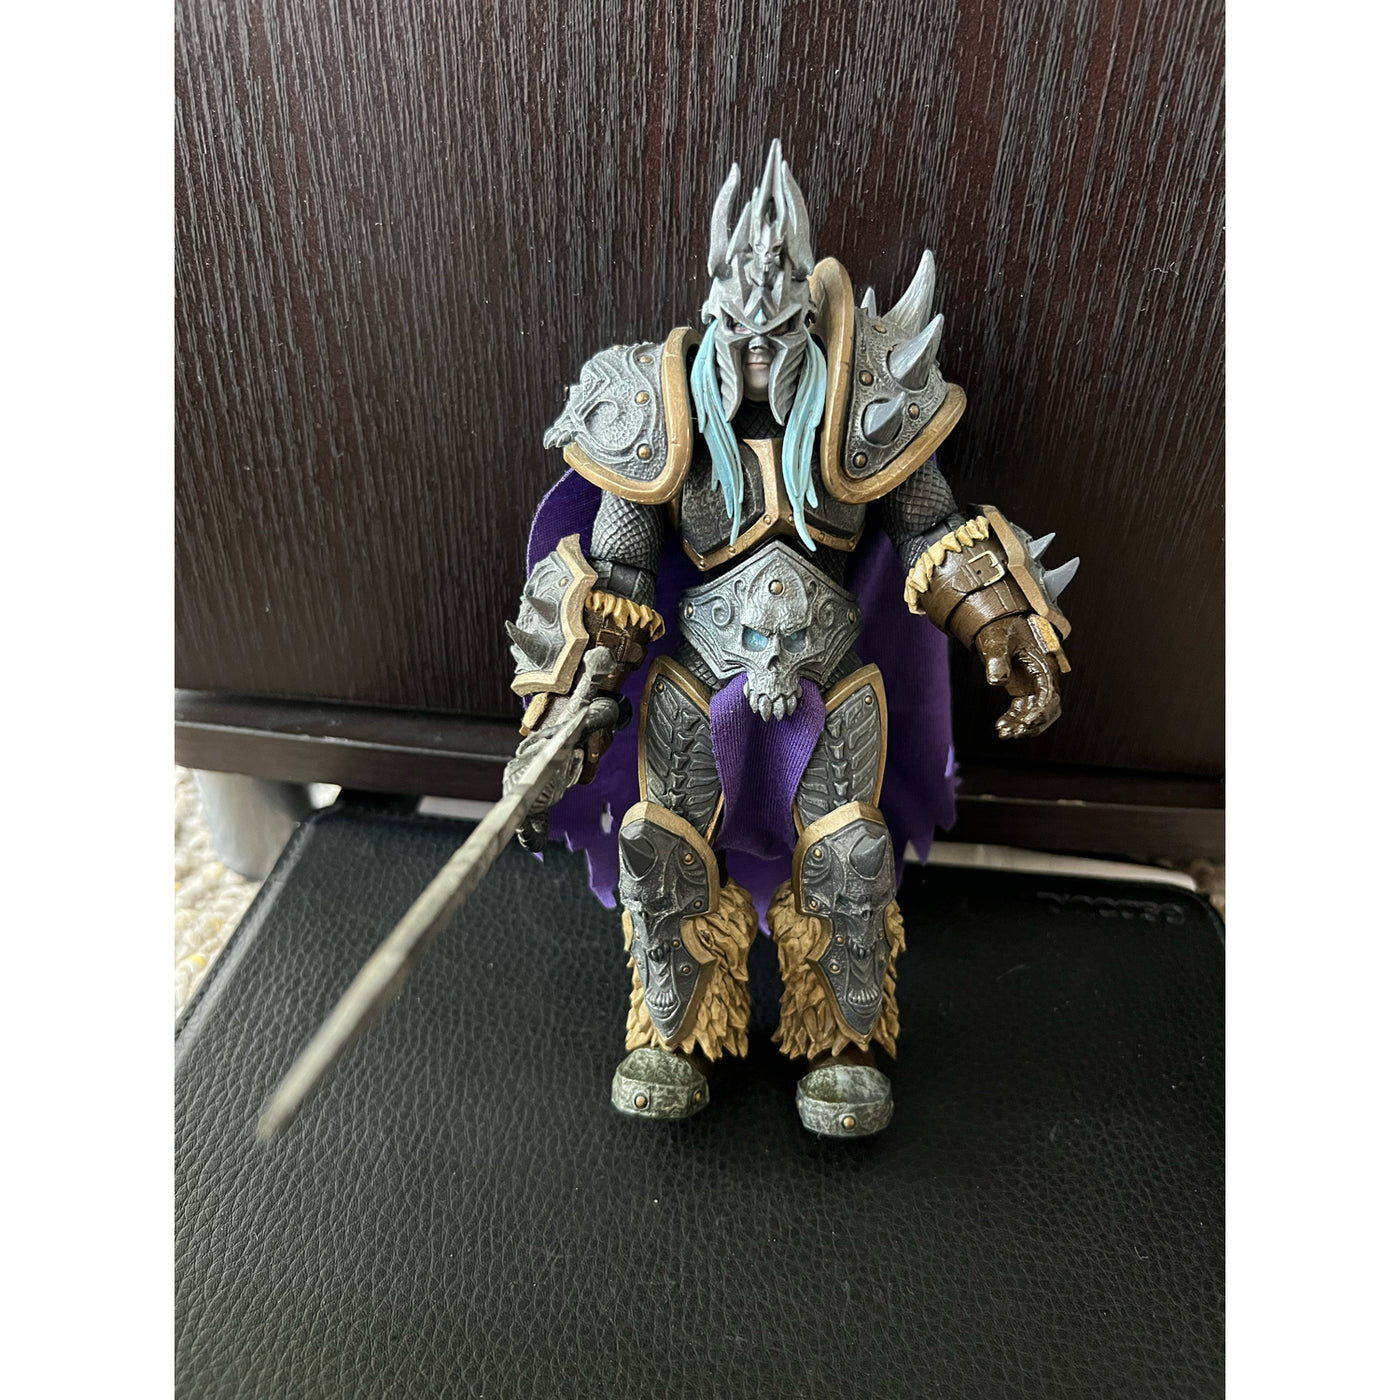 NECA - NECA Arthas Lich King Heroes of Storm (Loose) - 7" inches tall